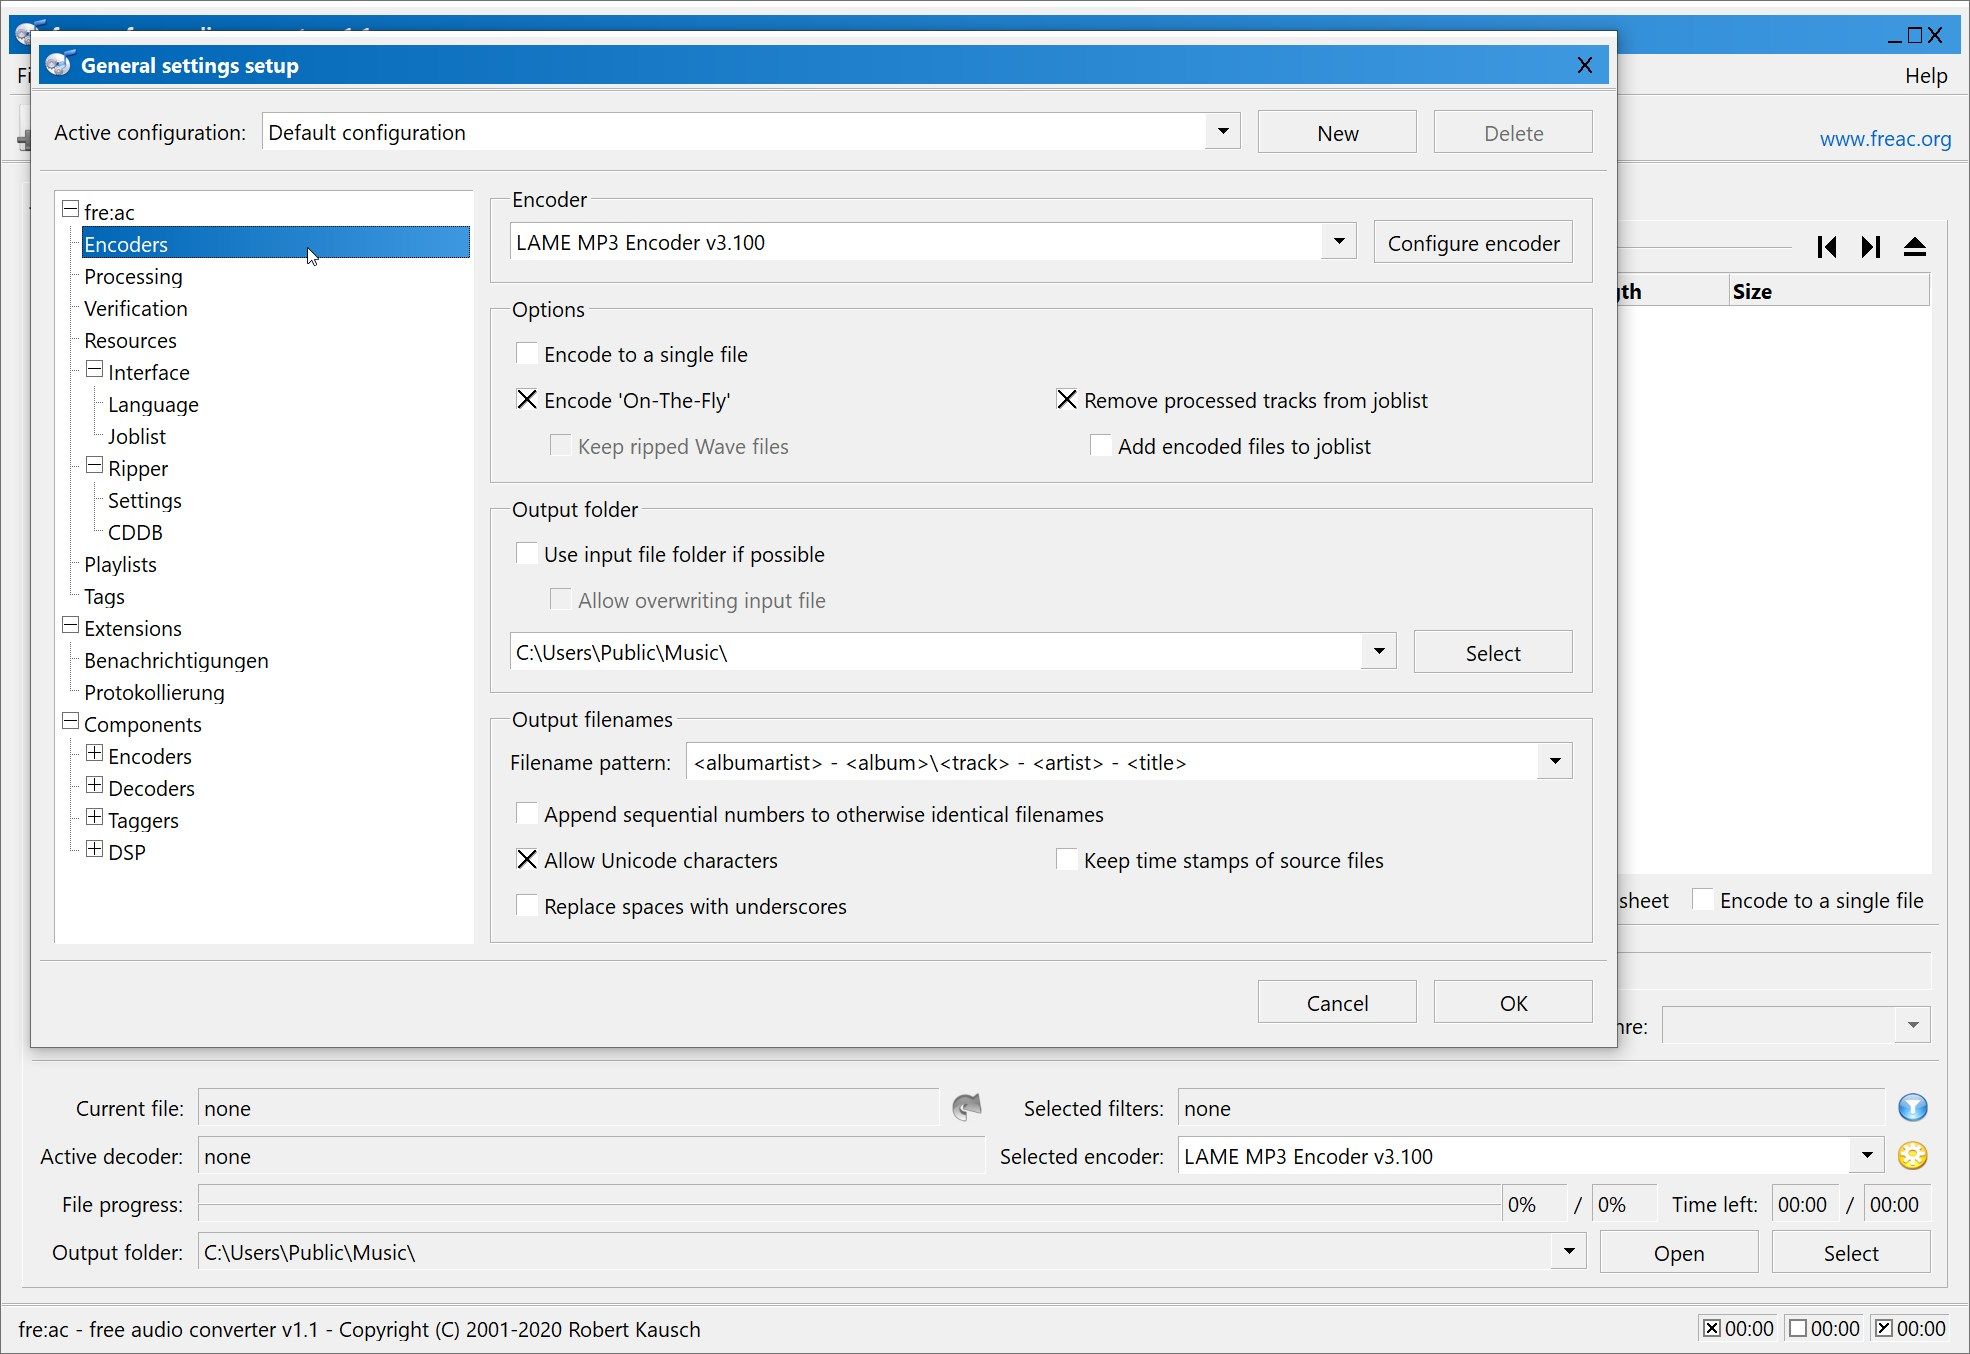 Customizing fre:ac settings in the configuration dialog